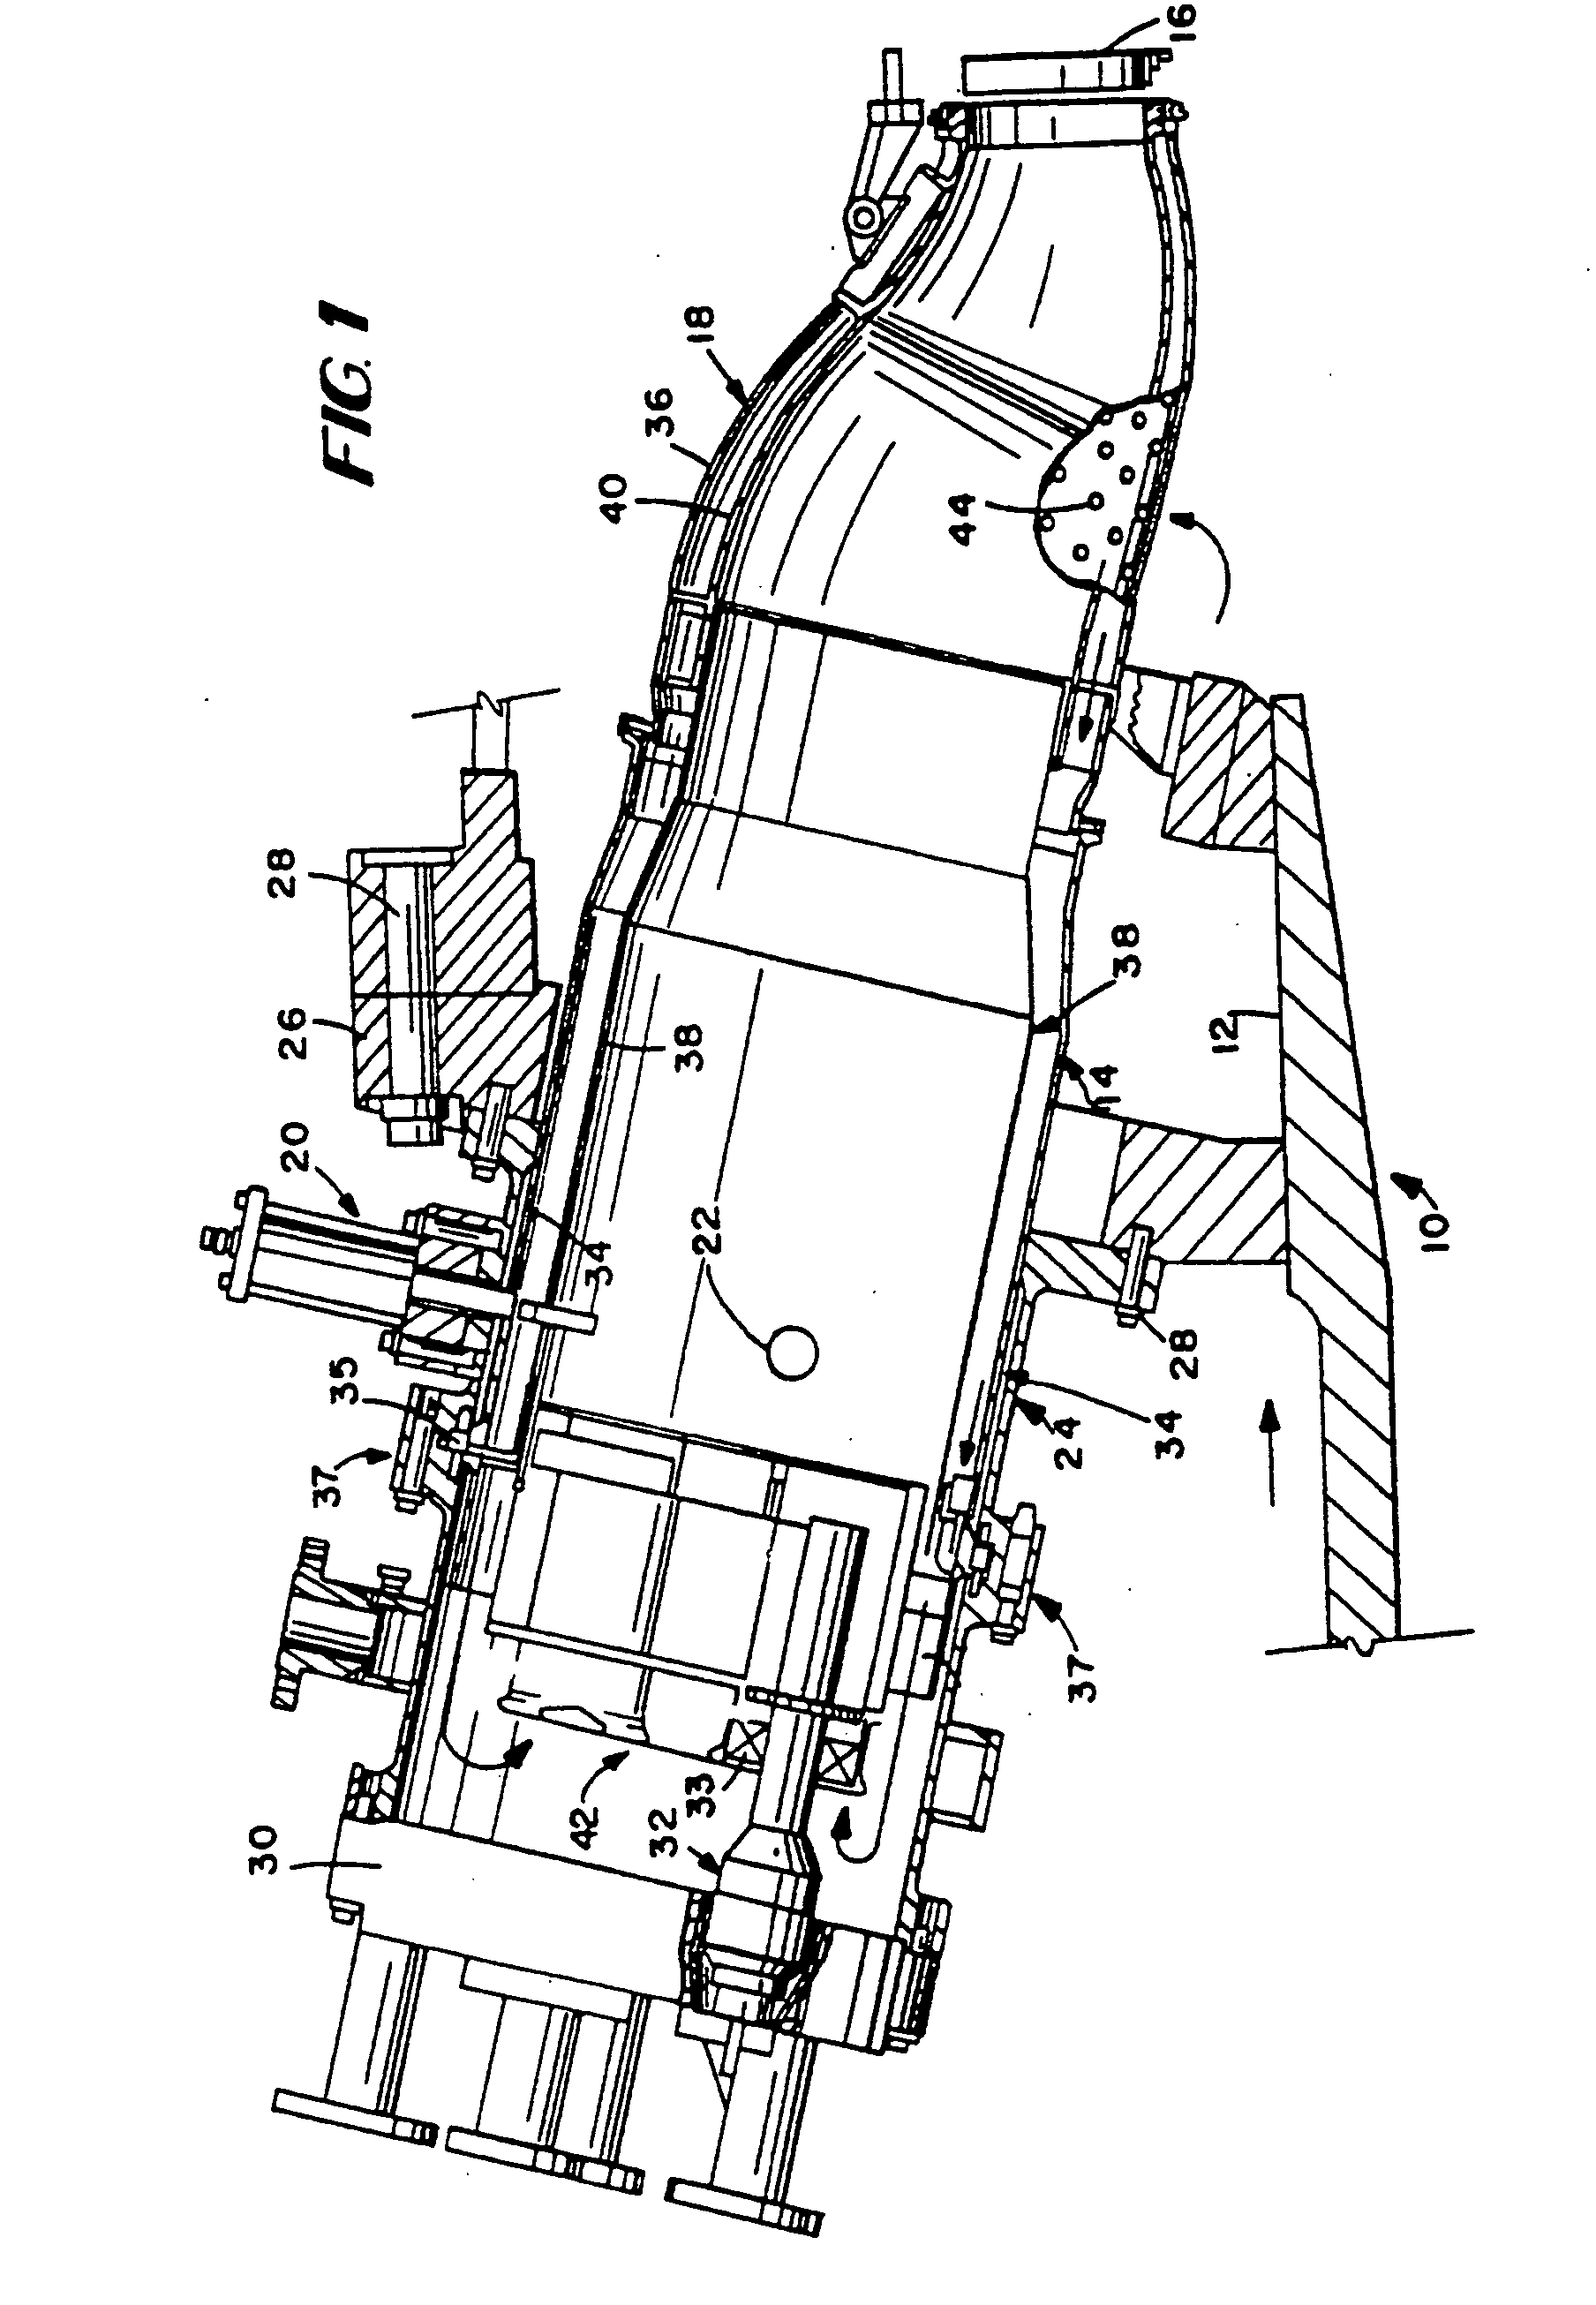 Combustion liner cap assembly for combustion dynamics reduction